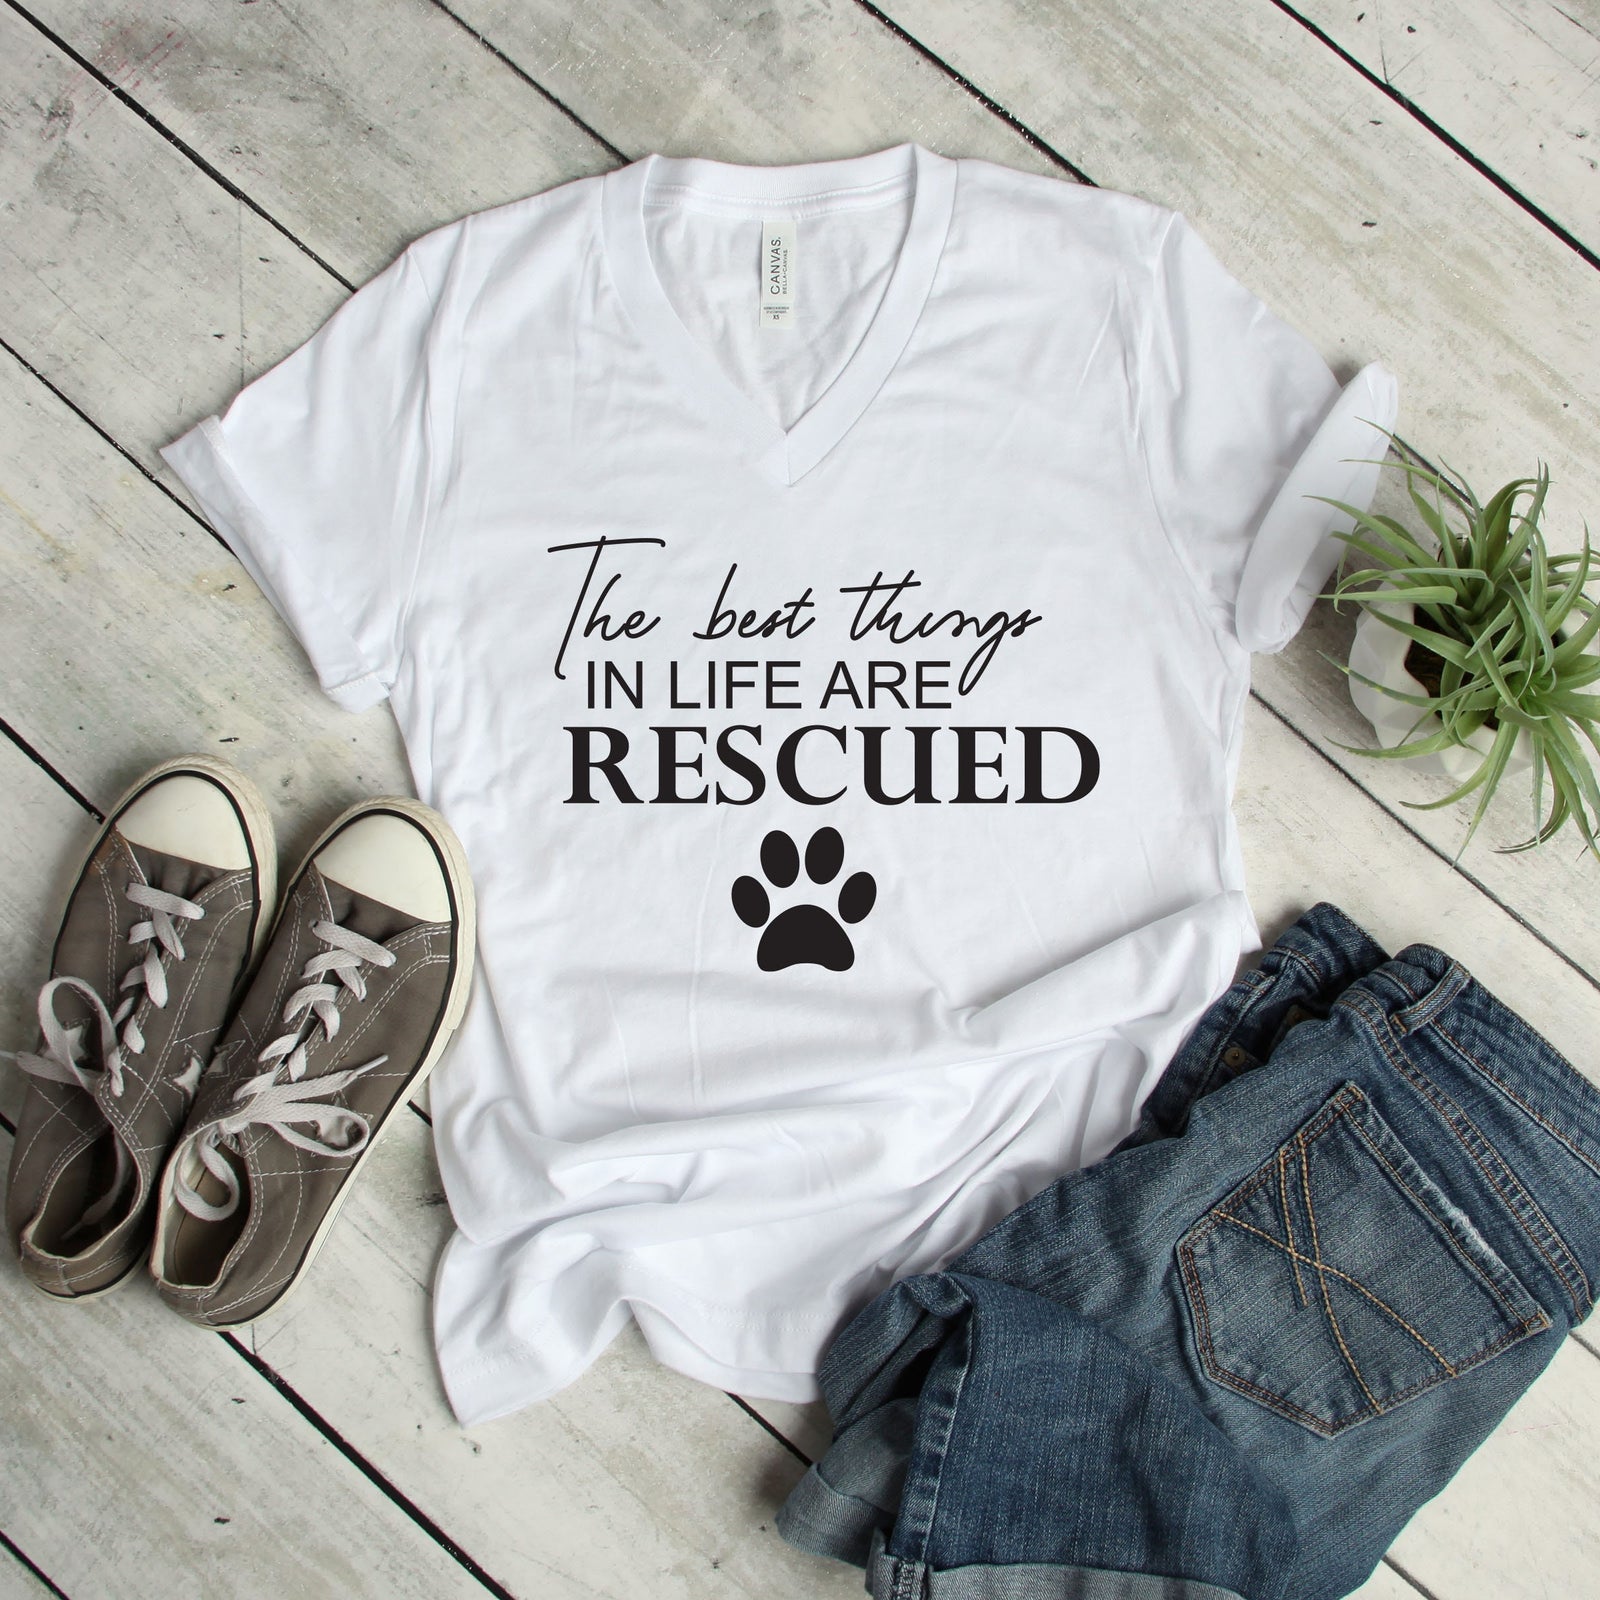 The Best Things in Life are Rescued T Shirt - Dog Mom Statement Shirt - Pet Rescue - Dog Rescue Shirt - Dog Lover T Shirt - Dog Paw Shirt